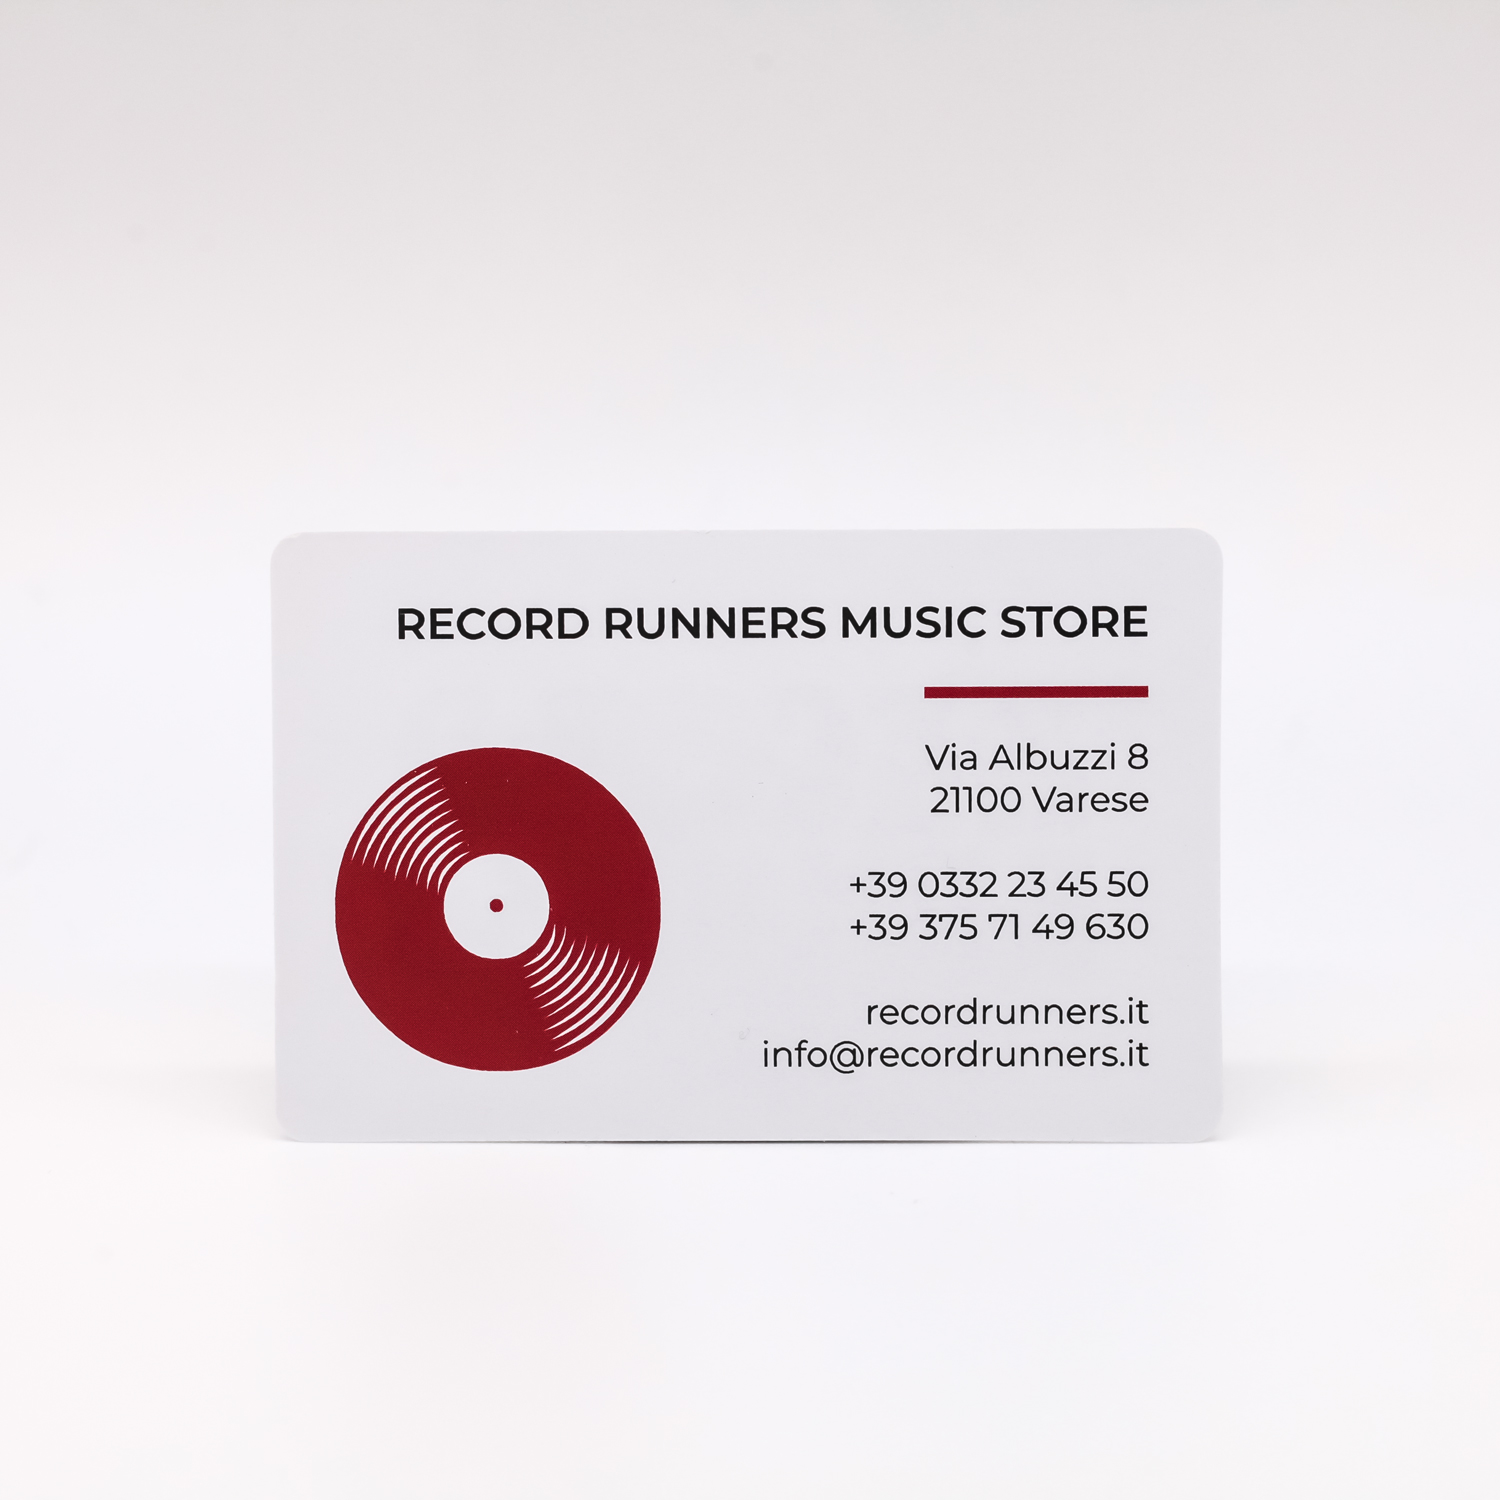 diego-cinquegrana-the-golden-torch-web-design-record-runners-music-store-varese-3